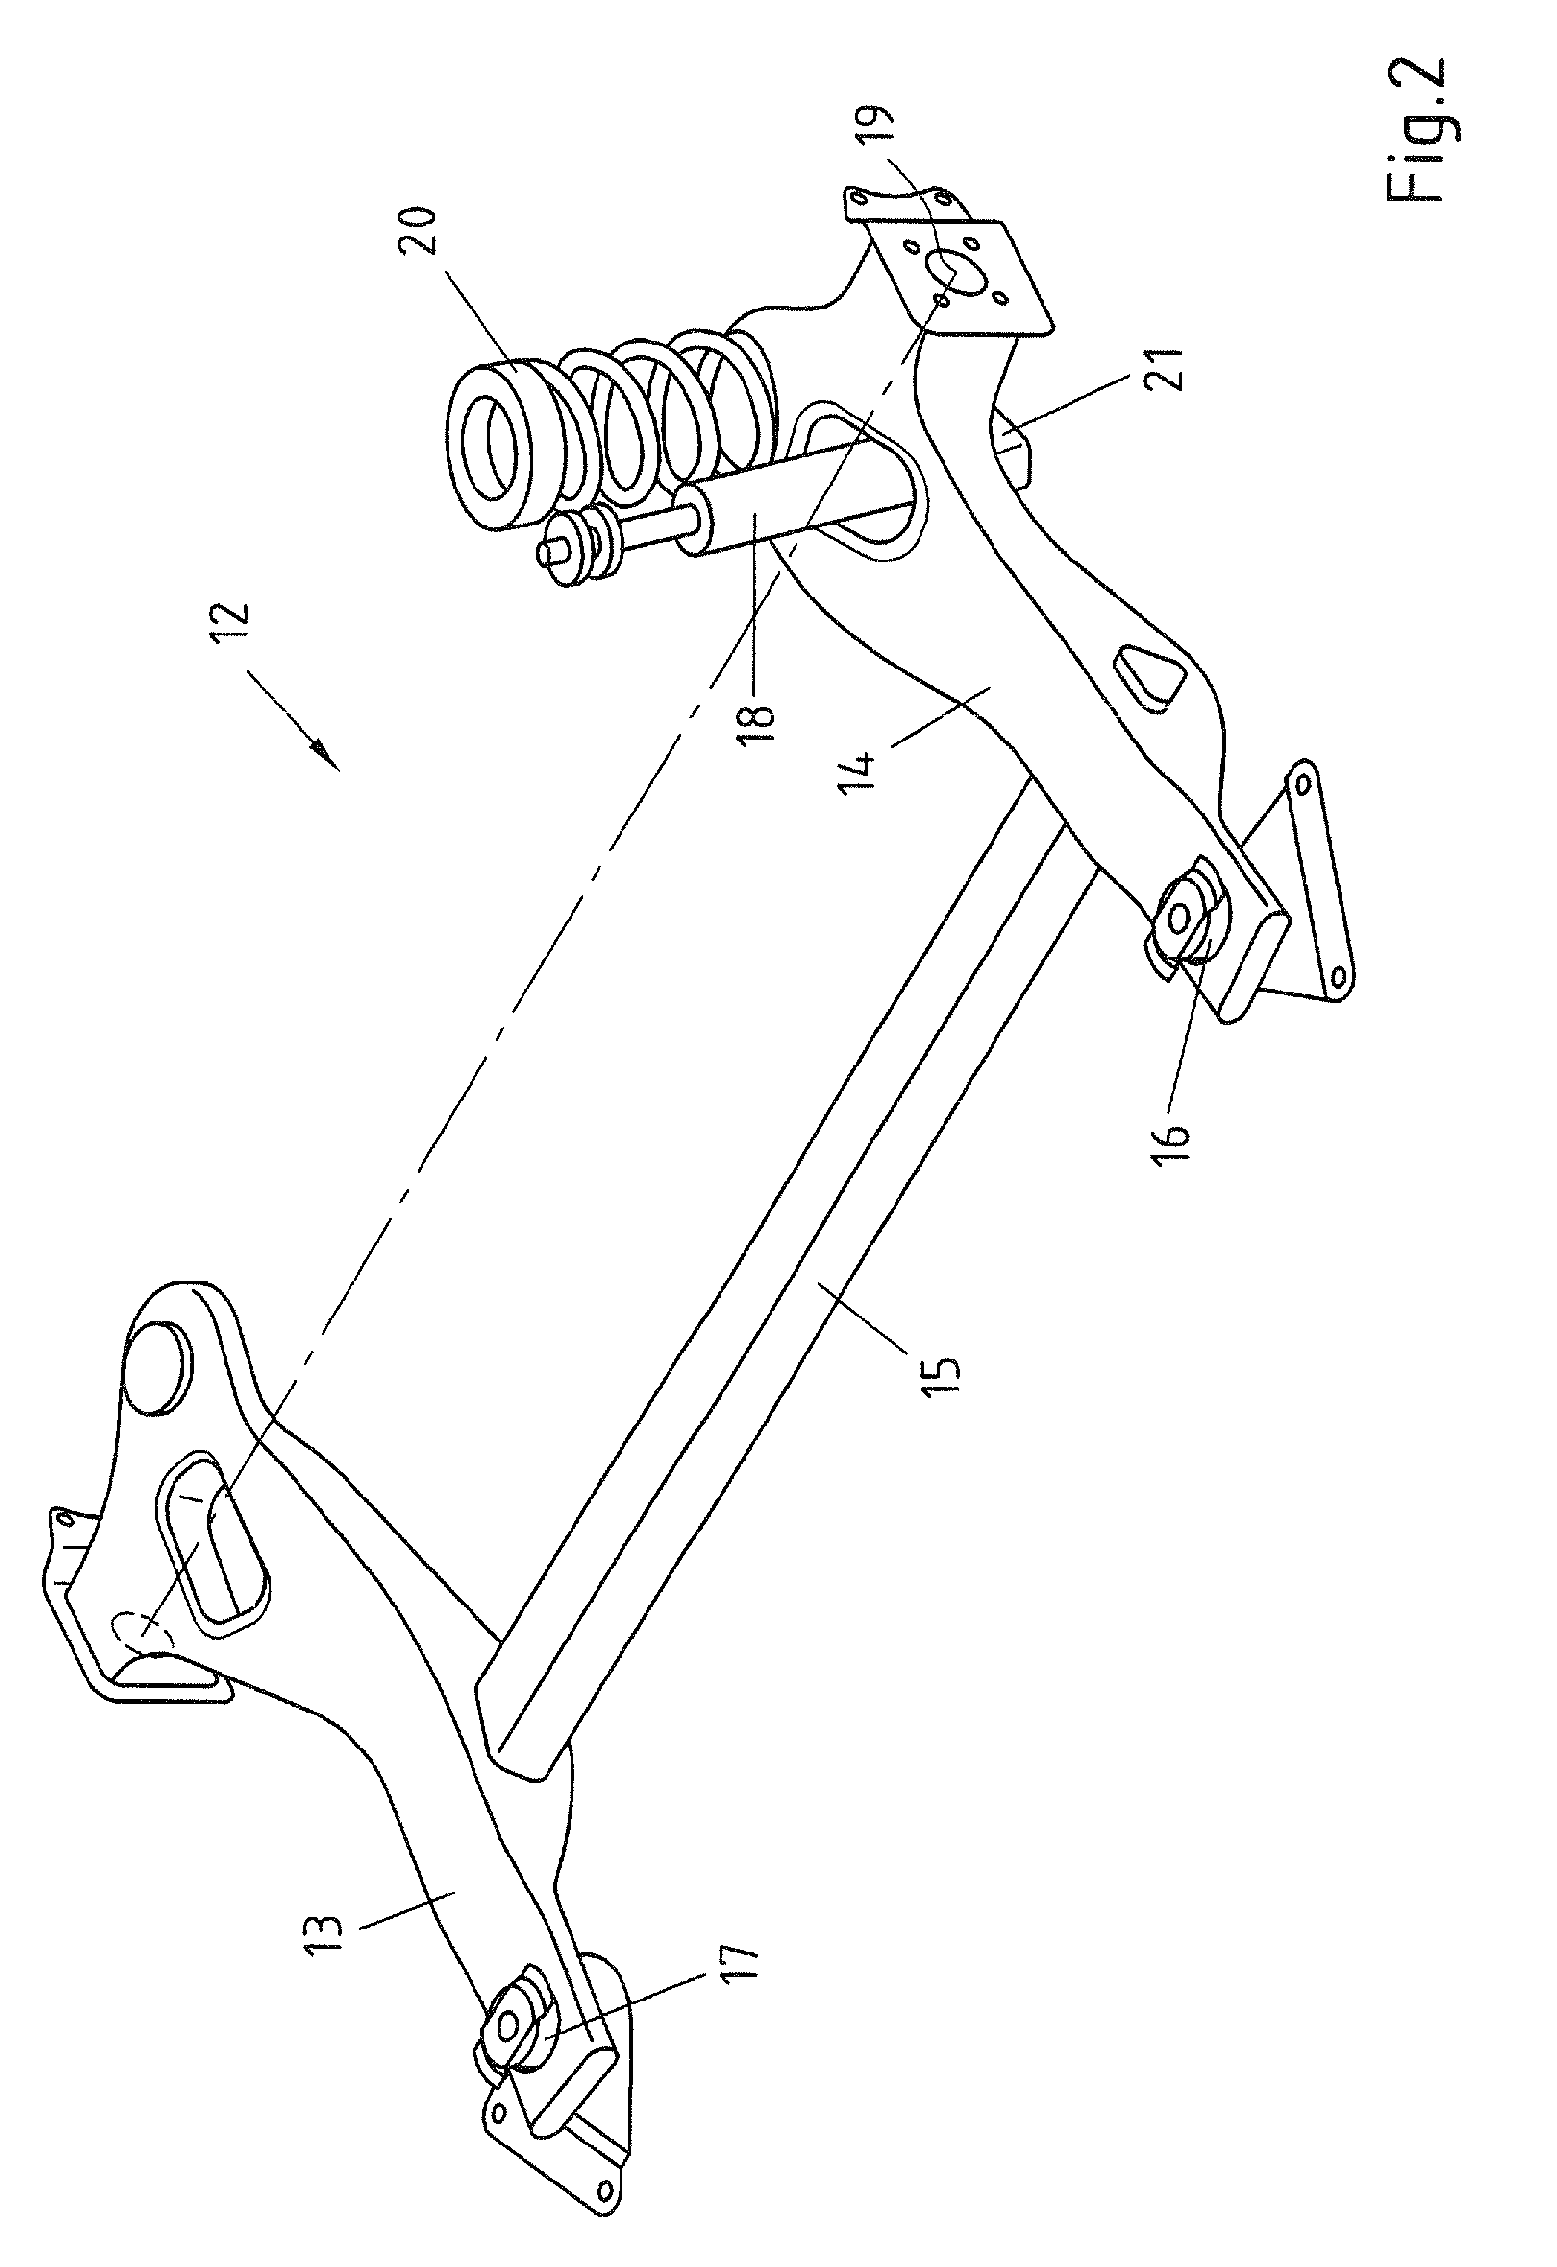 Vehicle chassis having modular rear axle construction